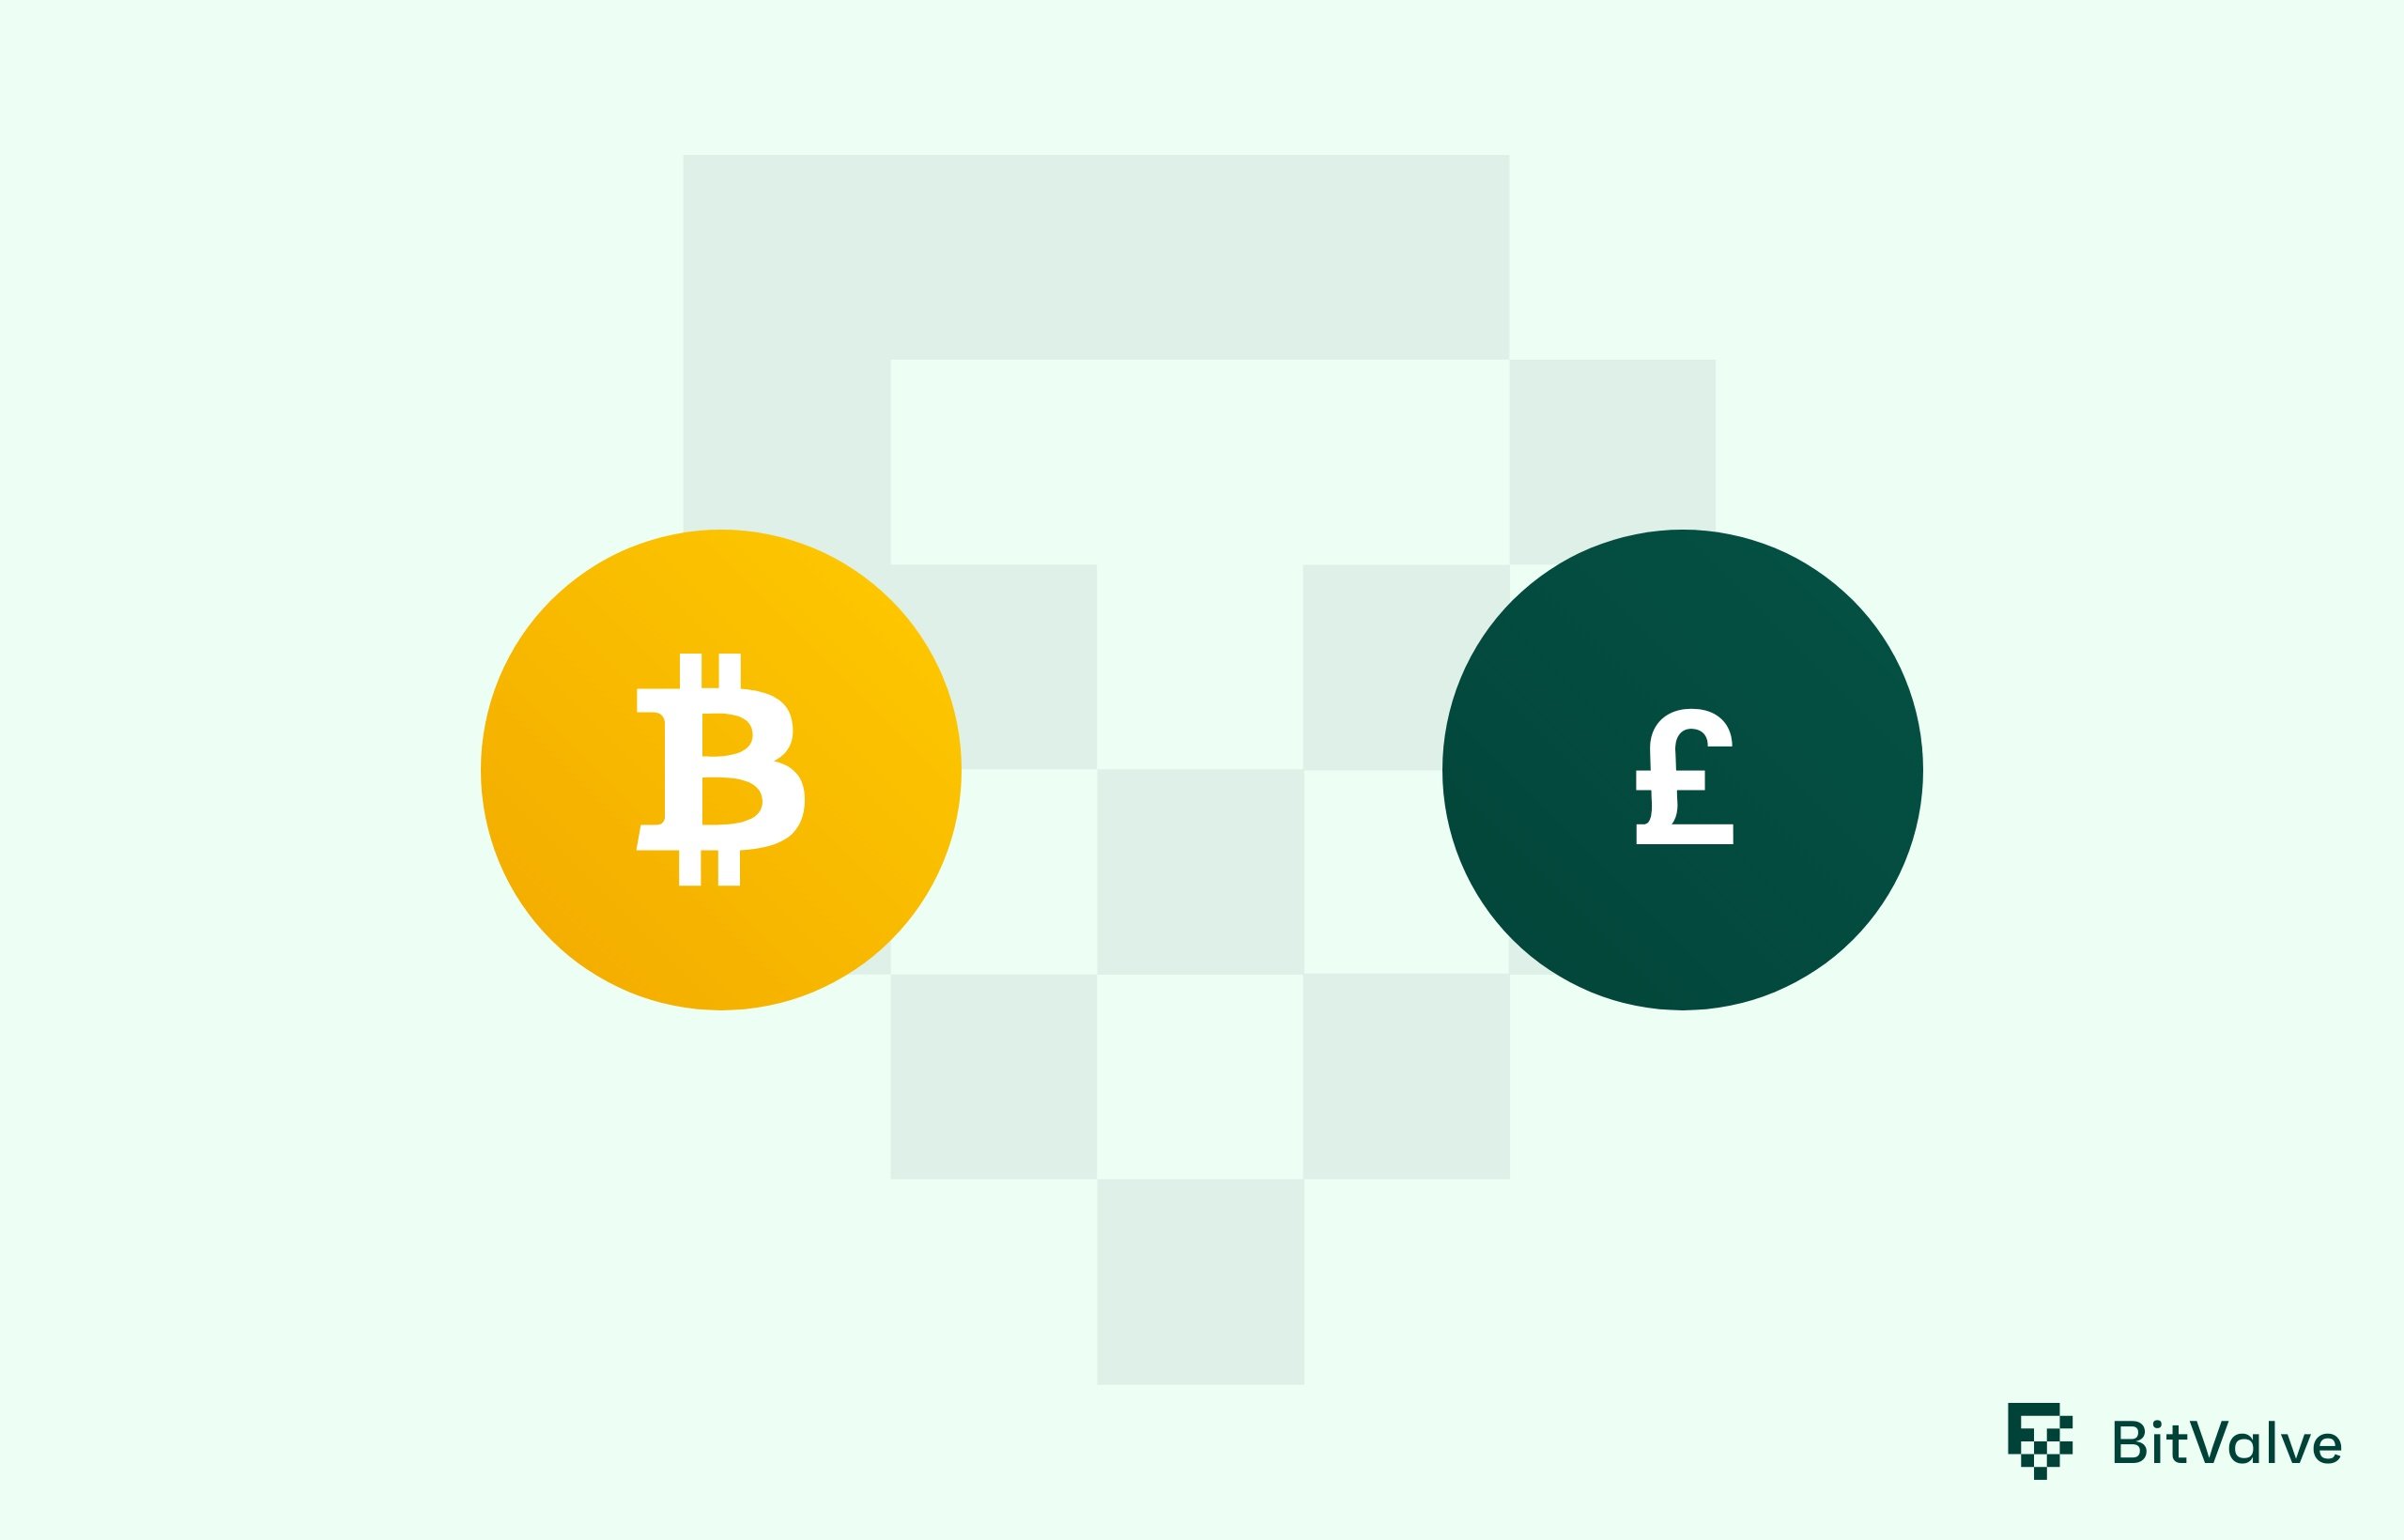 BTCGBP Bitcoin British Pound Sterling - Currency Exchange Rate Live Price Chart